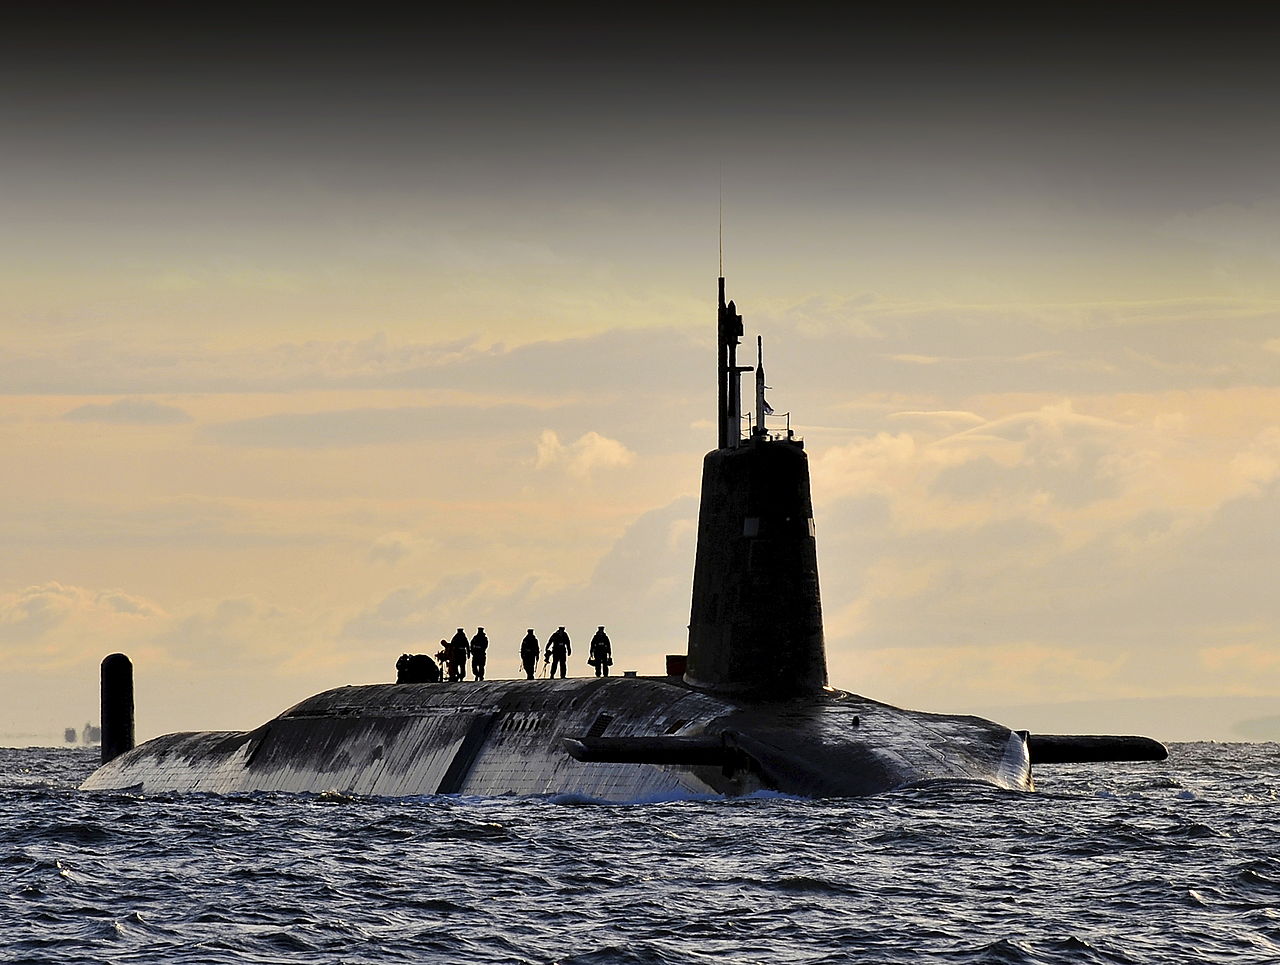 "Vanguard at Faslane 02" by CPOA(Phot) Tam McDonald - Defence Imagery. Licensed under OGL via Wikimedia Commons - http://bit.ly/1CBWlhW